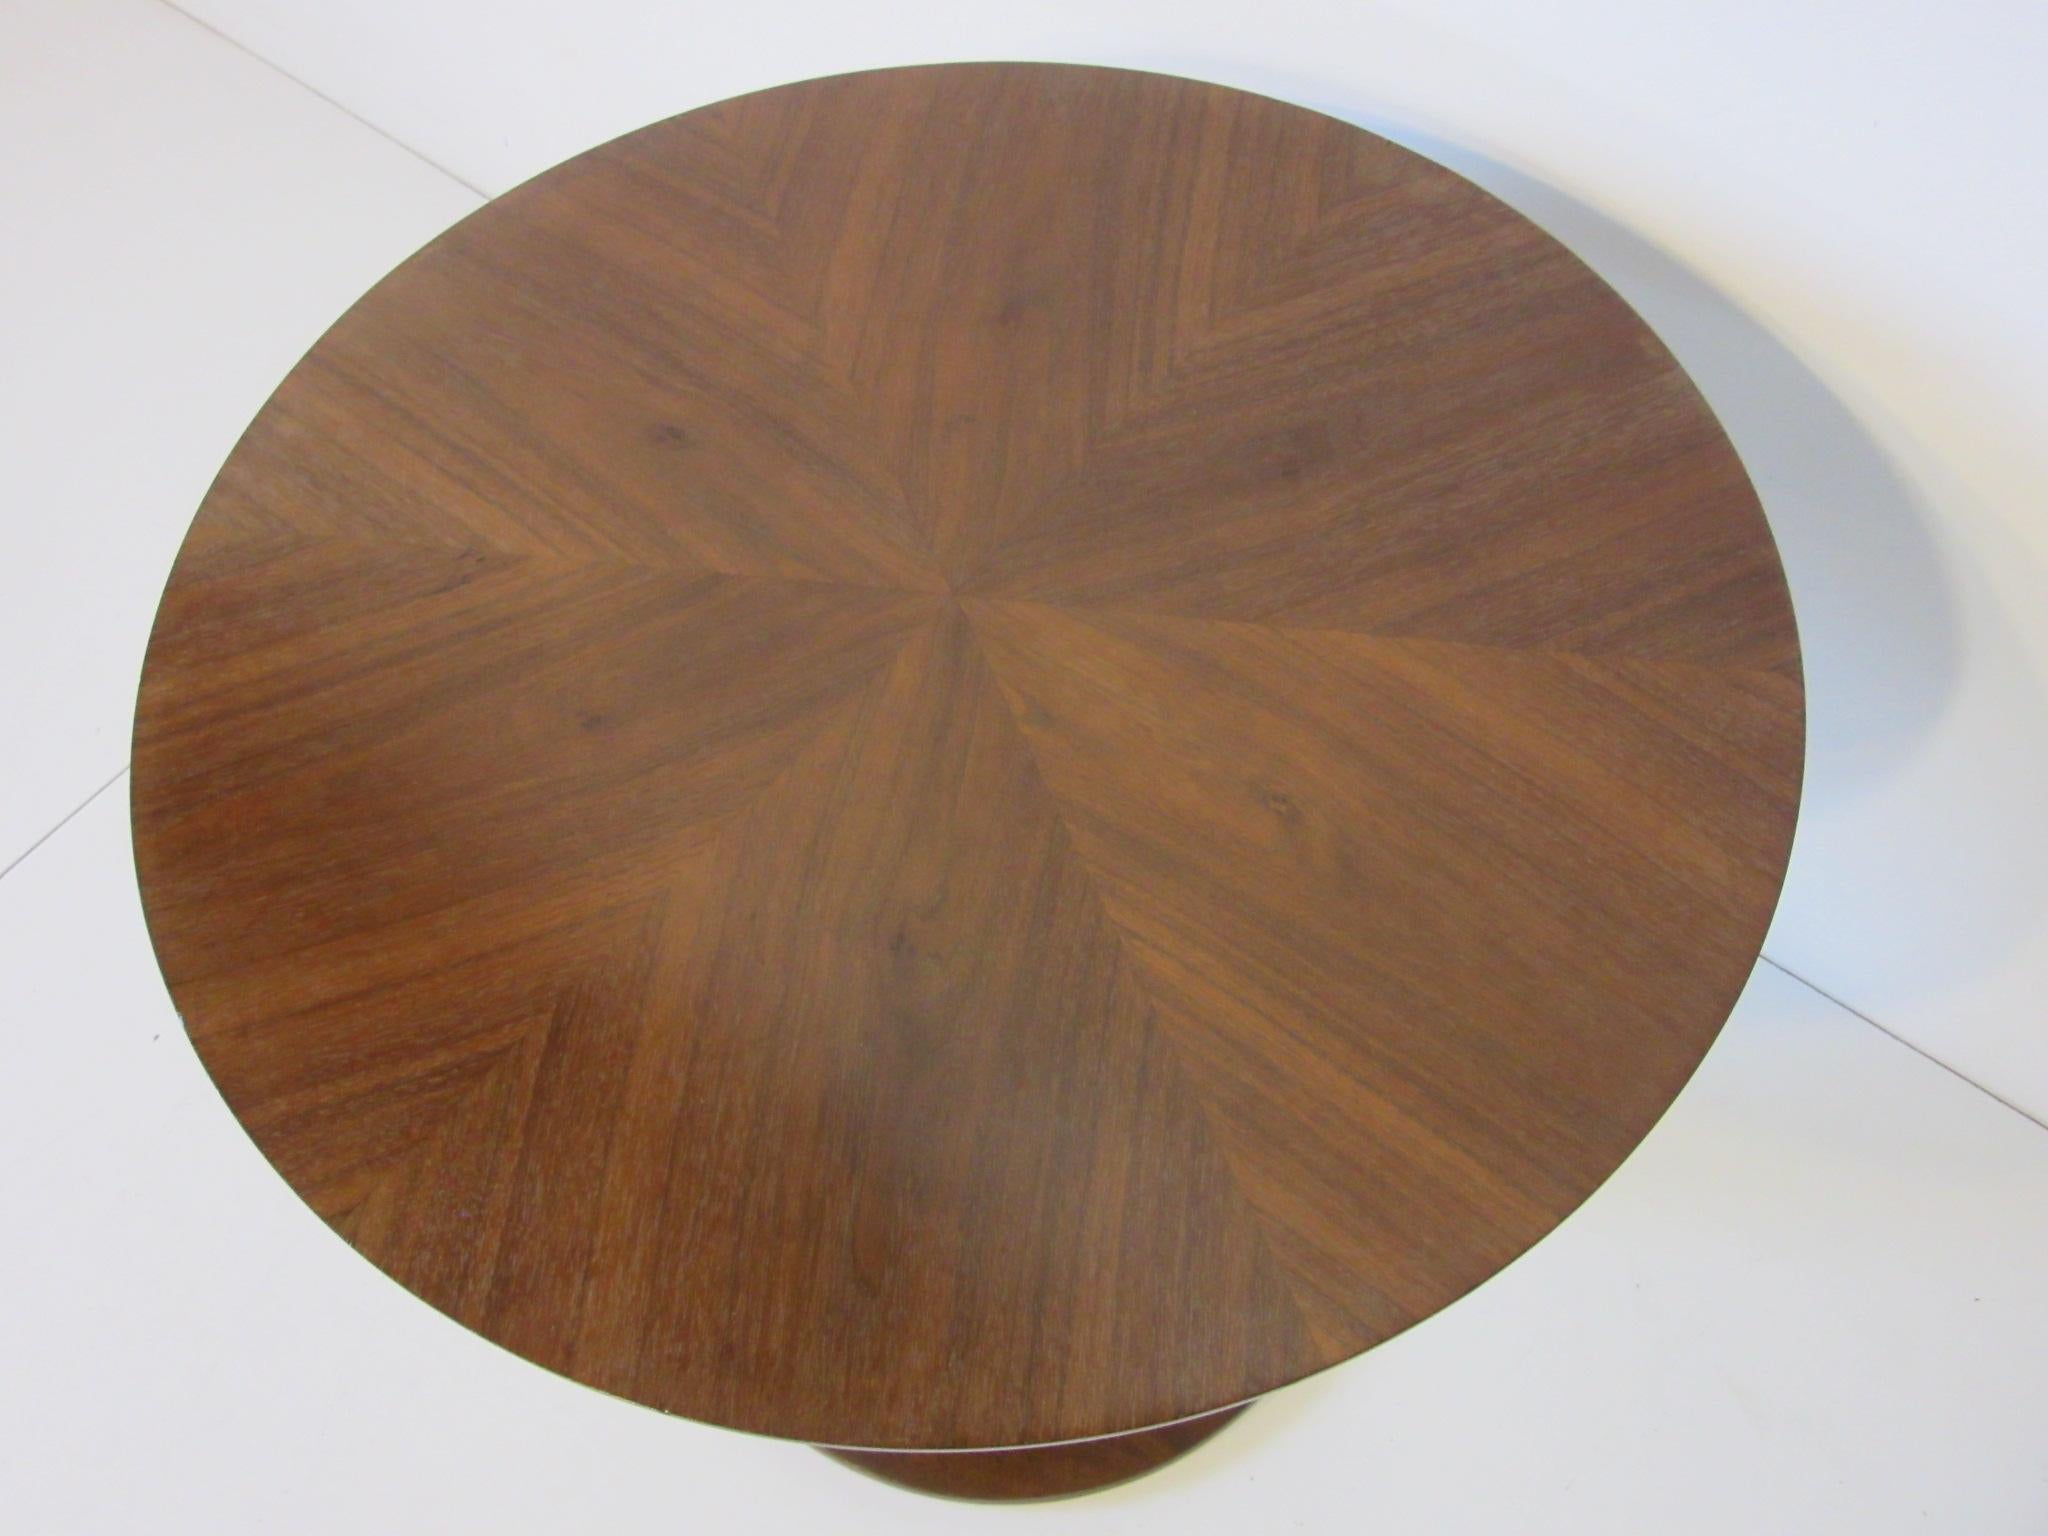 Mid-Century Modern Walnut Pedestal Based Side Table by Drexel for the Declaration Collection